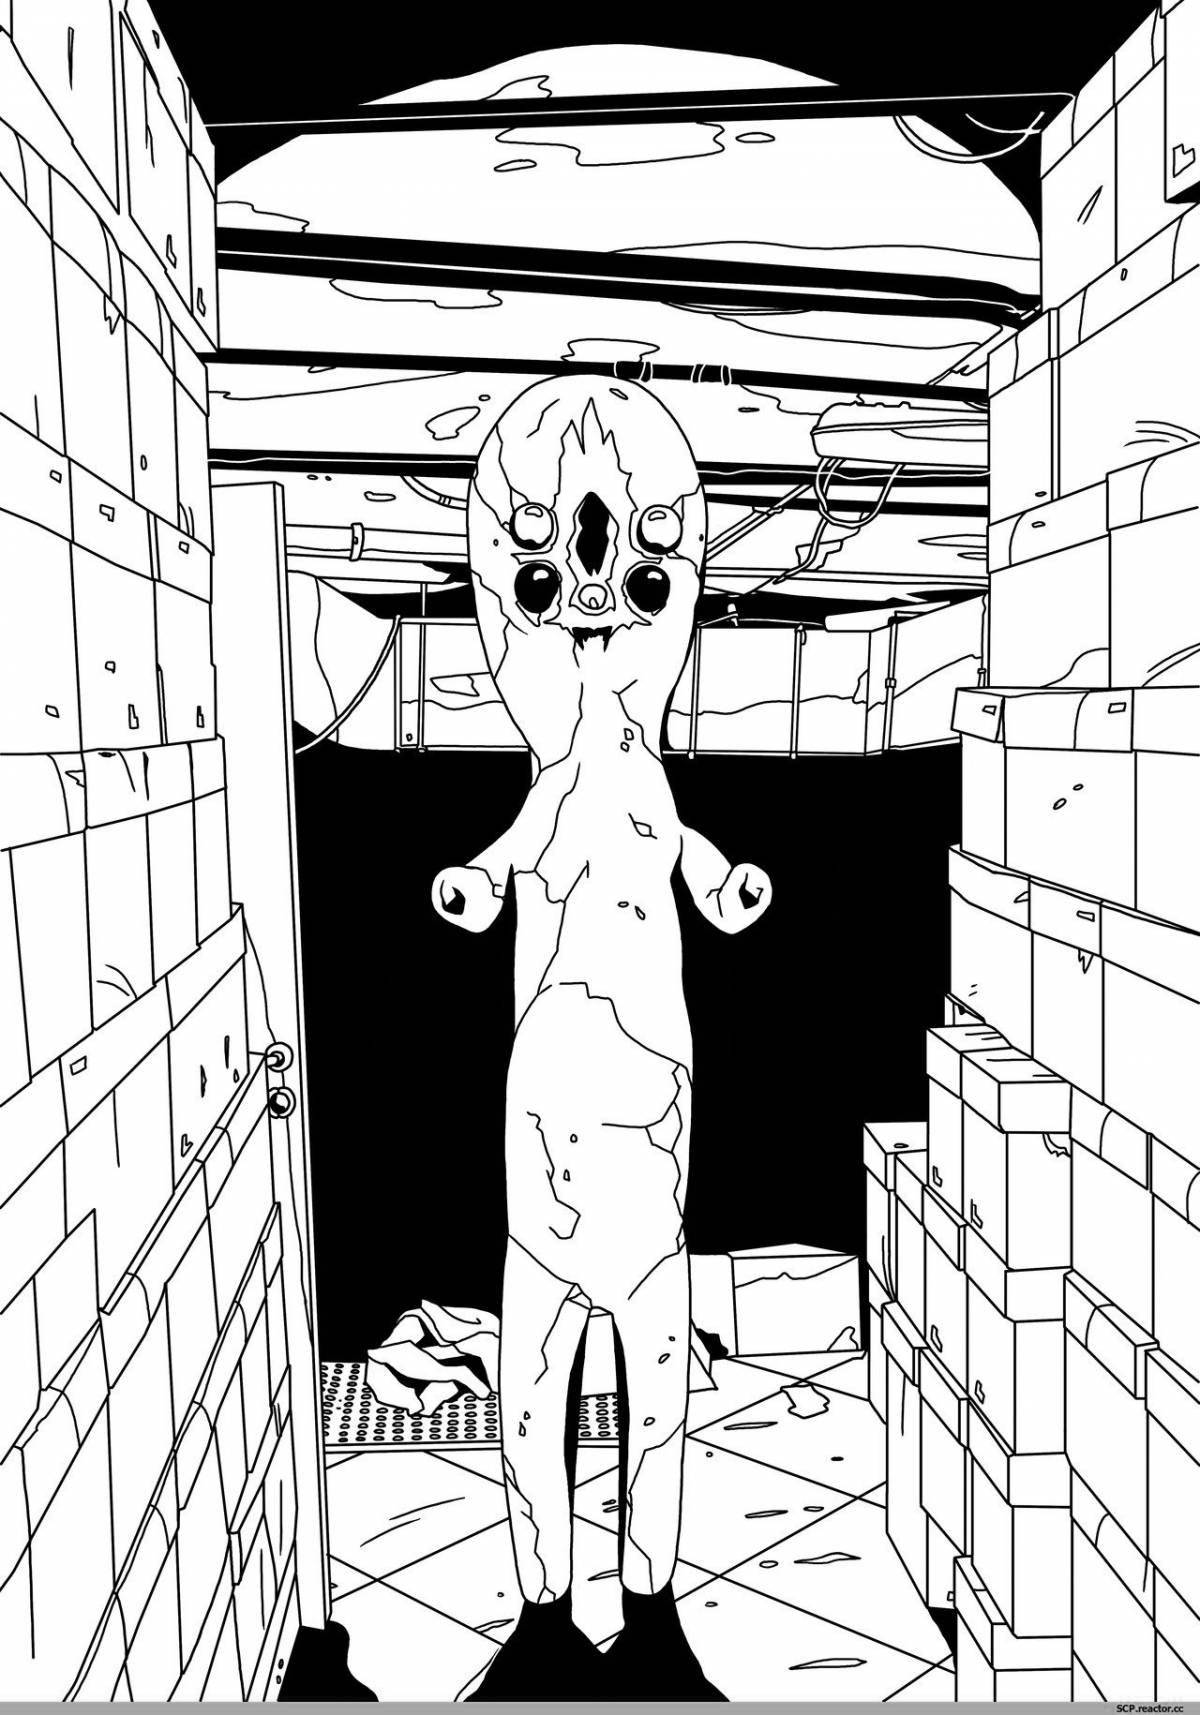 Scp art sculpture coloring page